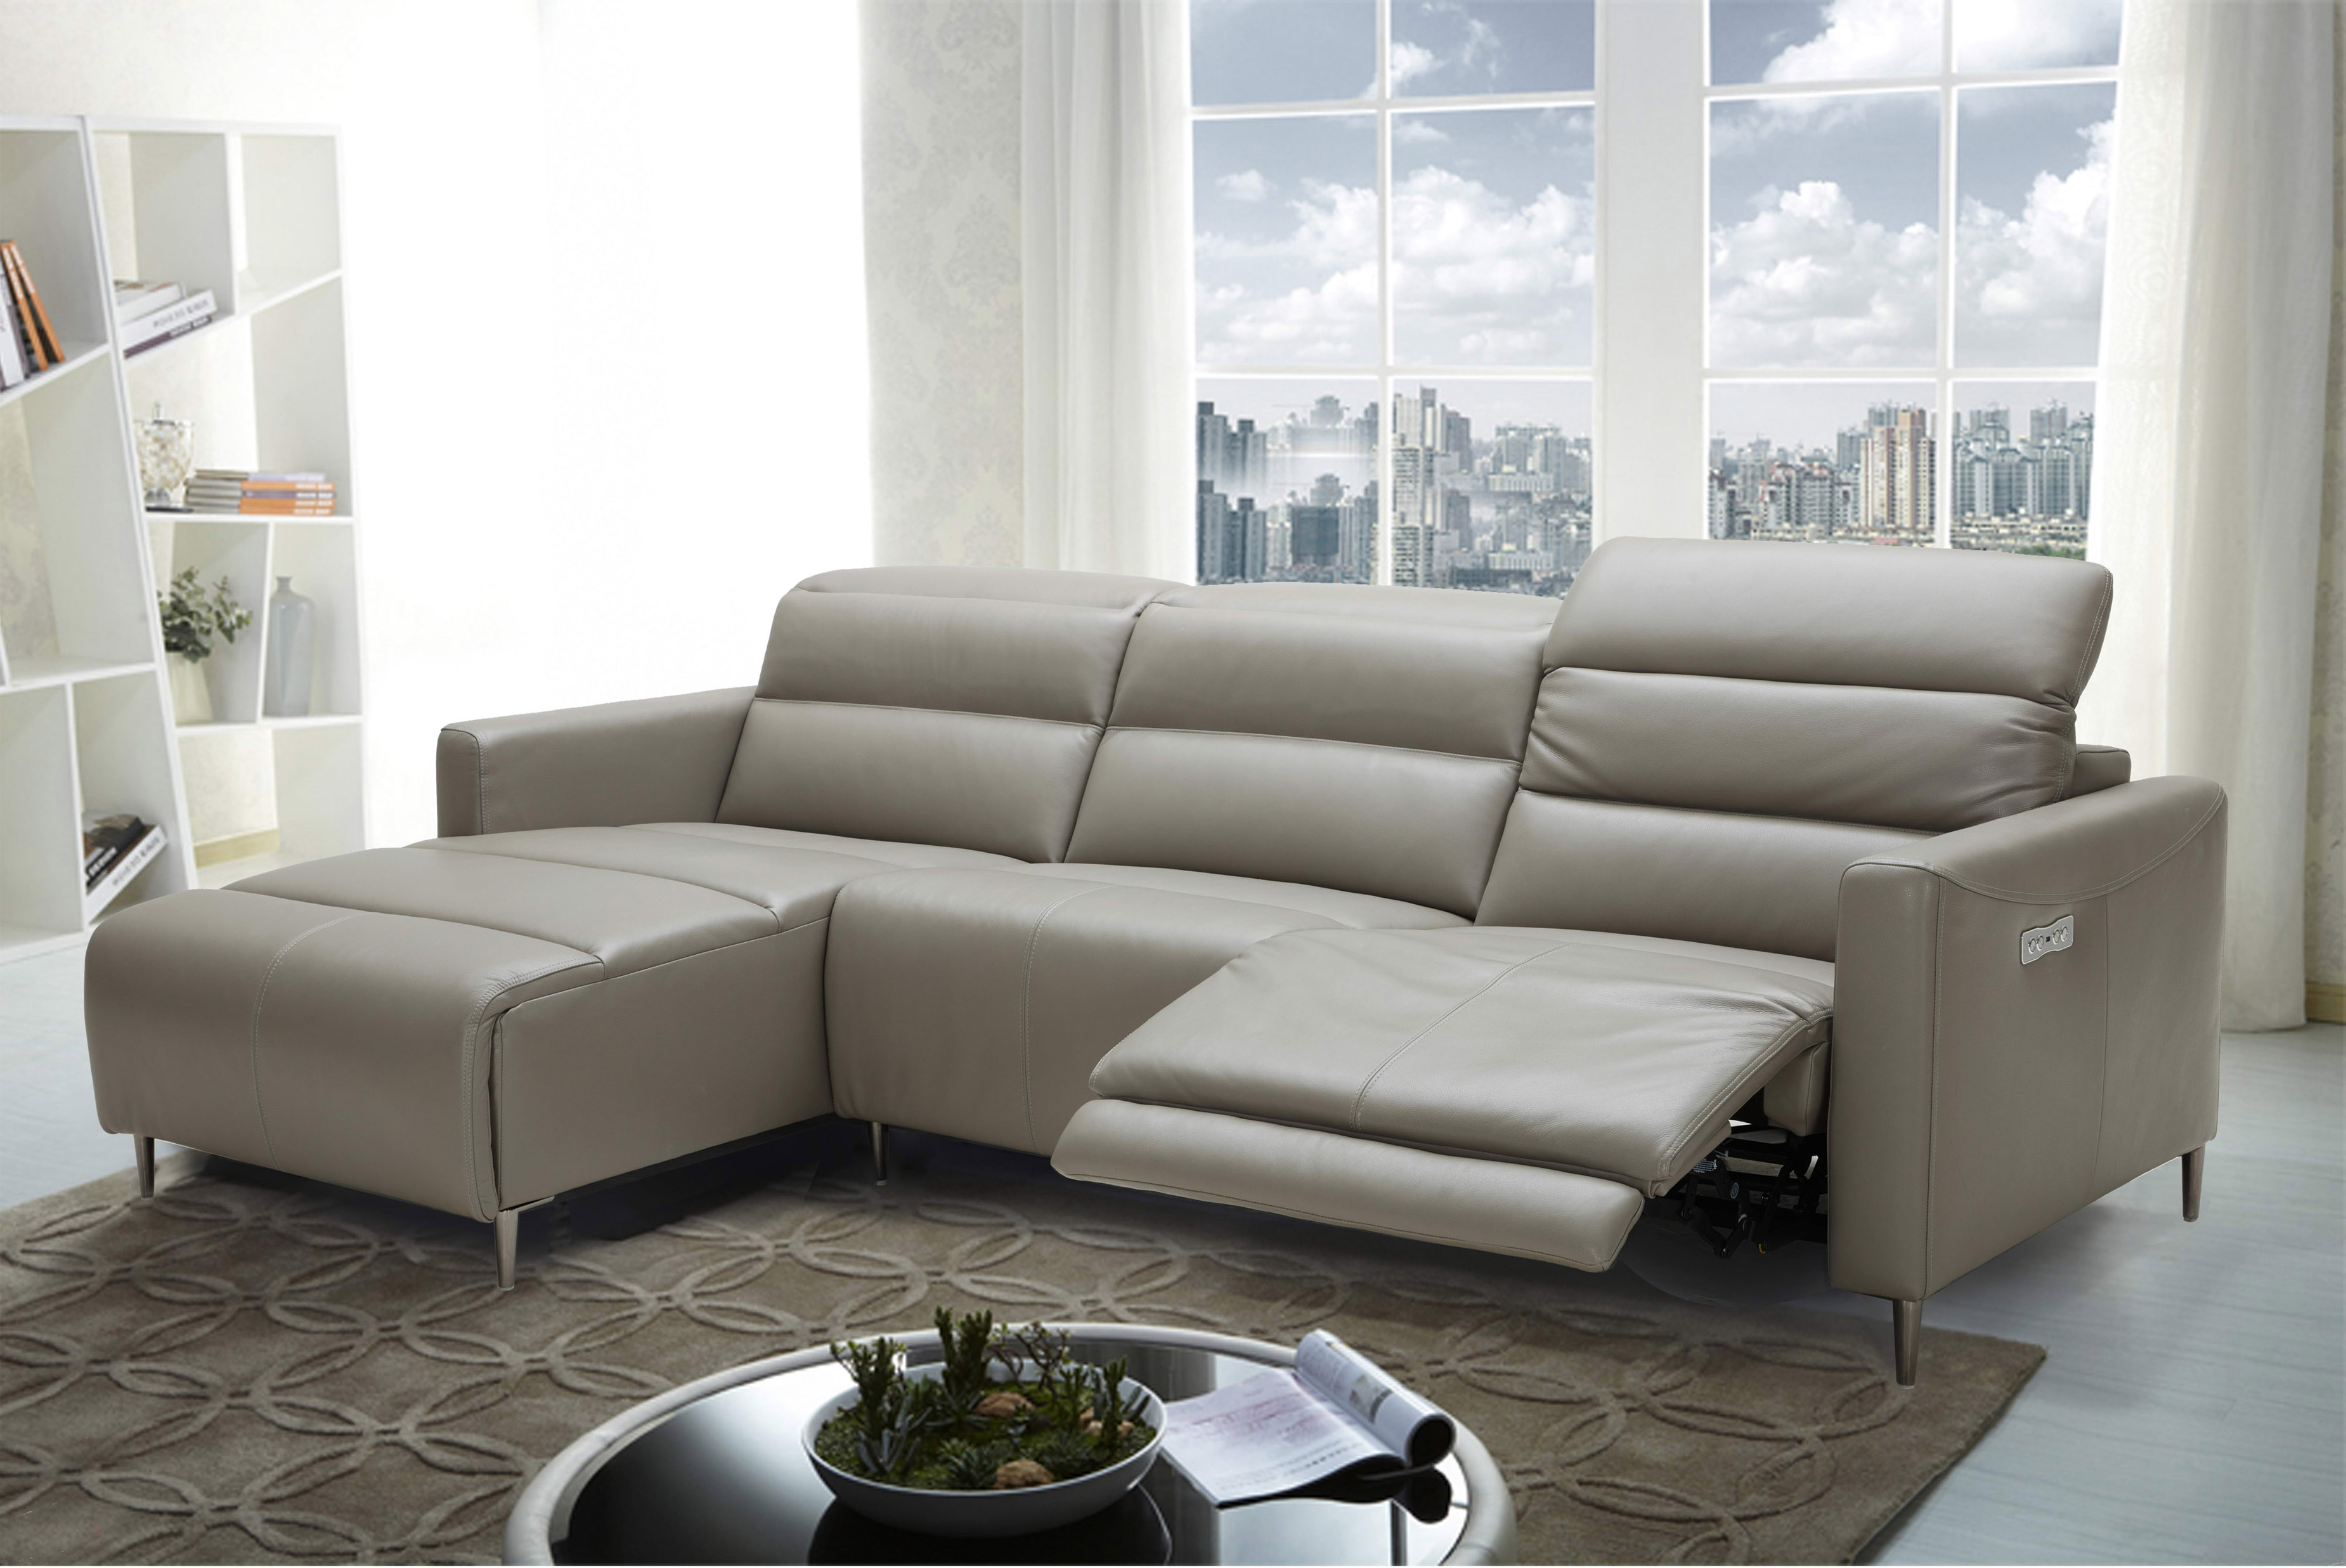 Exclusive Italian Leather Living Room Furniture Baltimore Maryland J&M